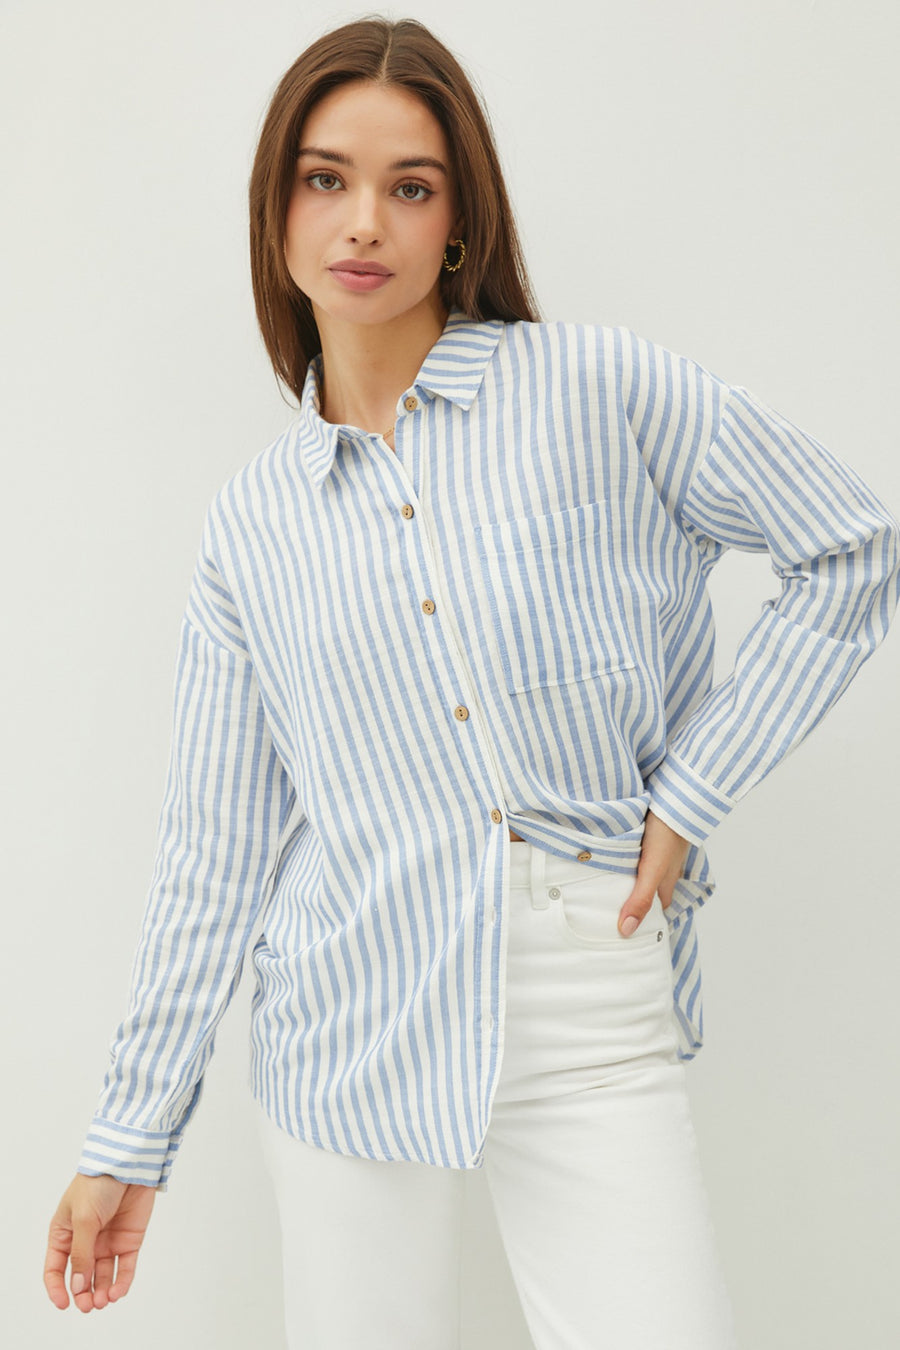 Featuring a fitted longsleeve striped button up with front pocket detail in the color Blue stripe